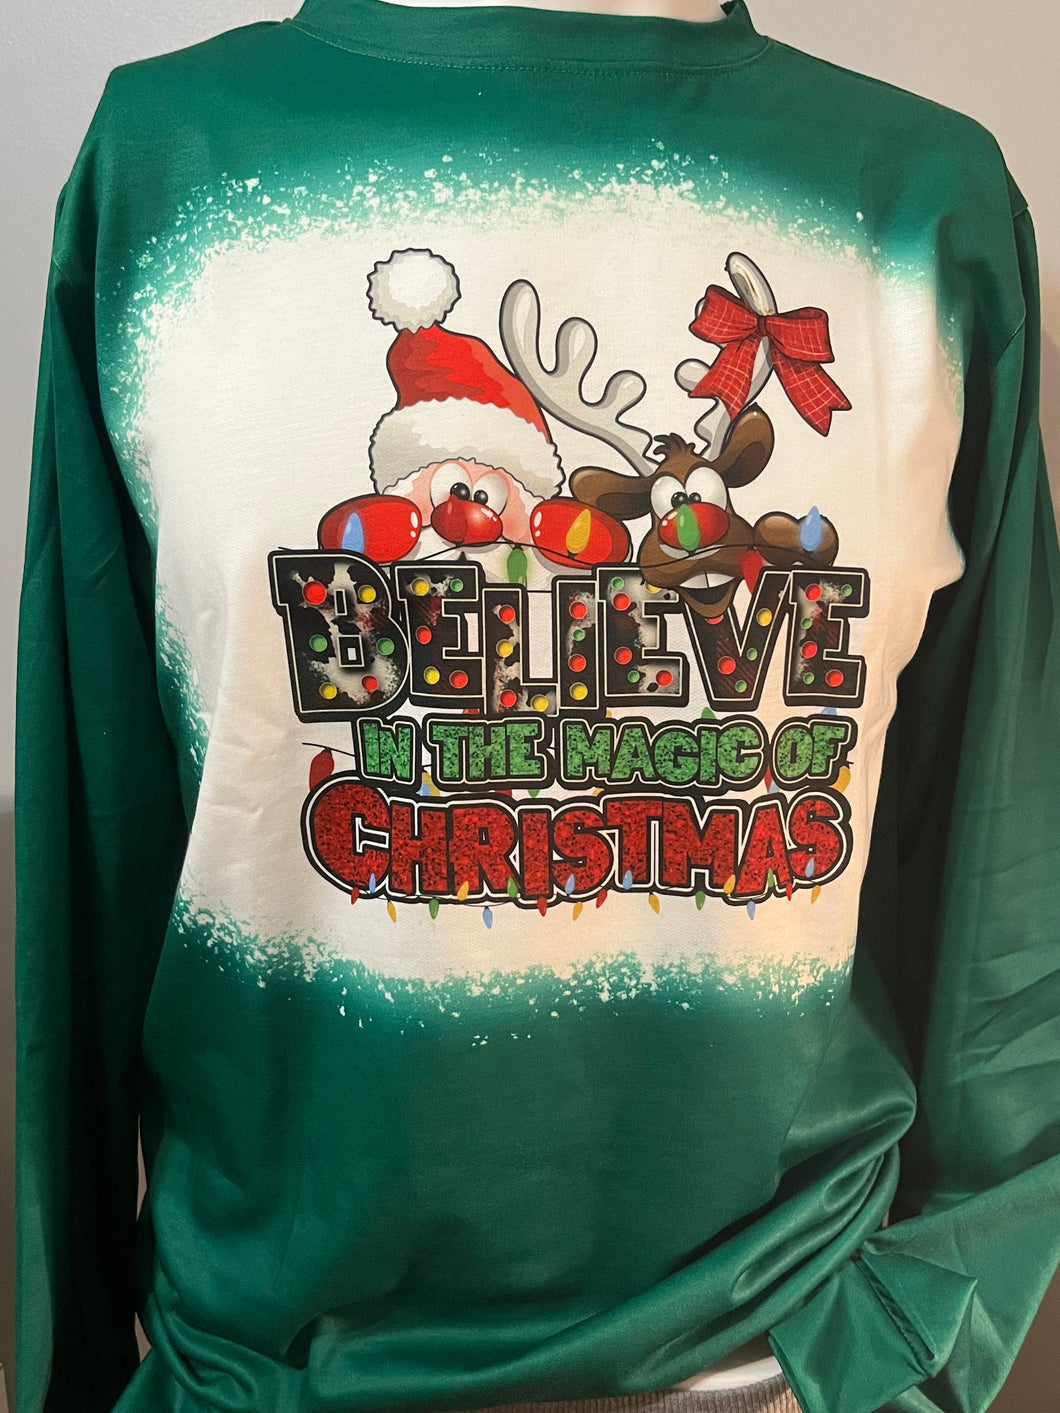 Believe in the Spirit of Christmas bleached tee